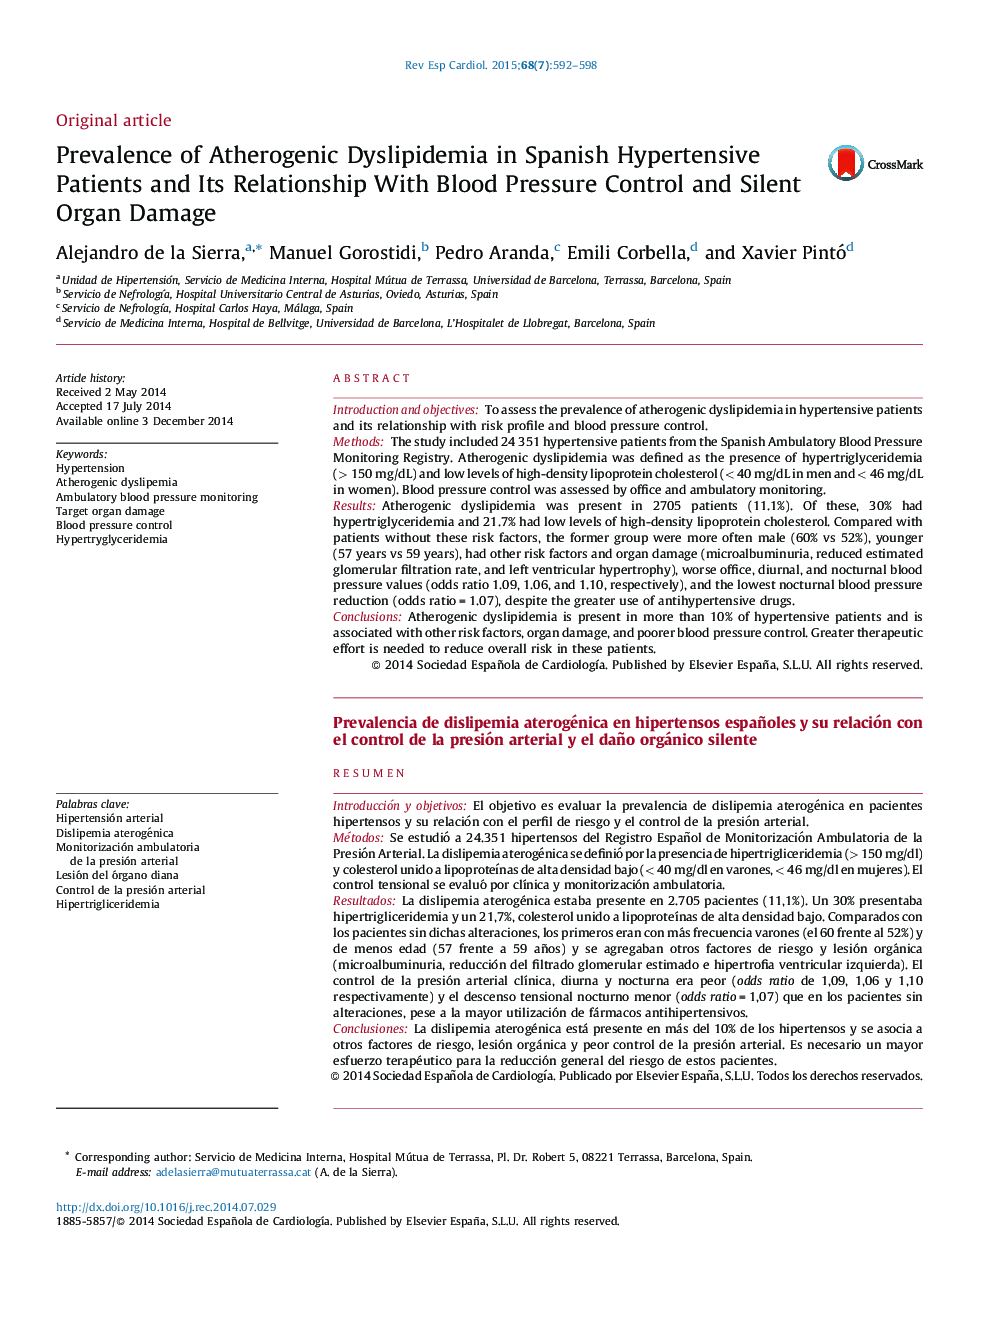 Prevalence of Atherogenic Dyslipidemia in Spanish Hypertensive Patients and Its Relationship With Blood Pressure Control and Silent Organ Damage